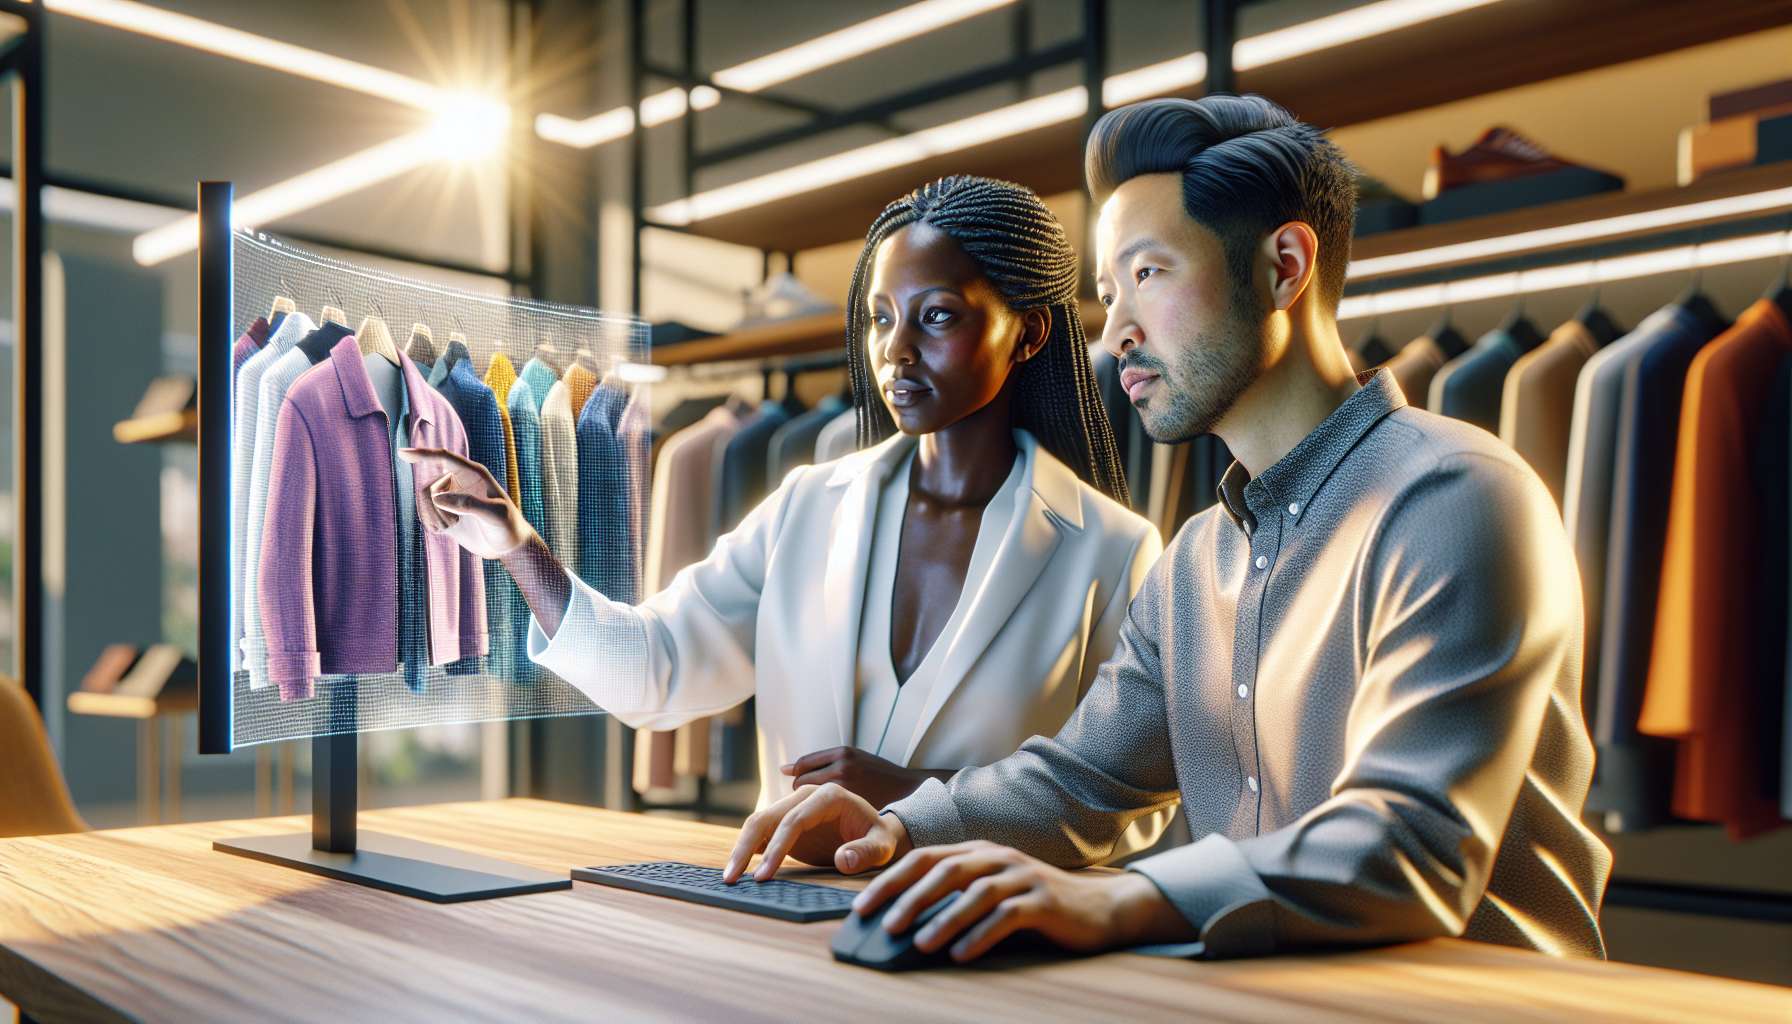 The Next Step in Retail: AR for Virtual Try-Ons